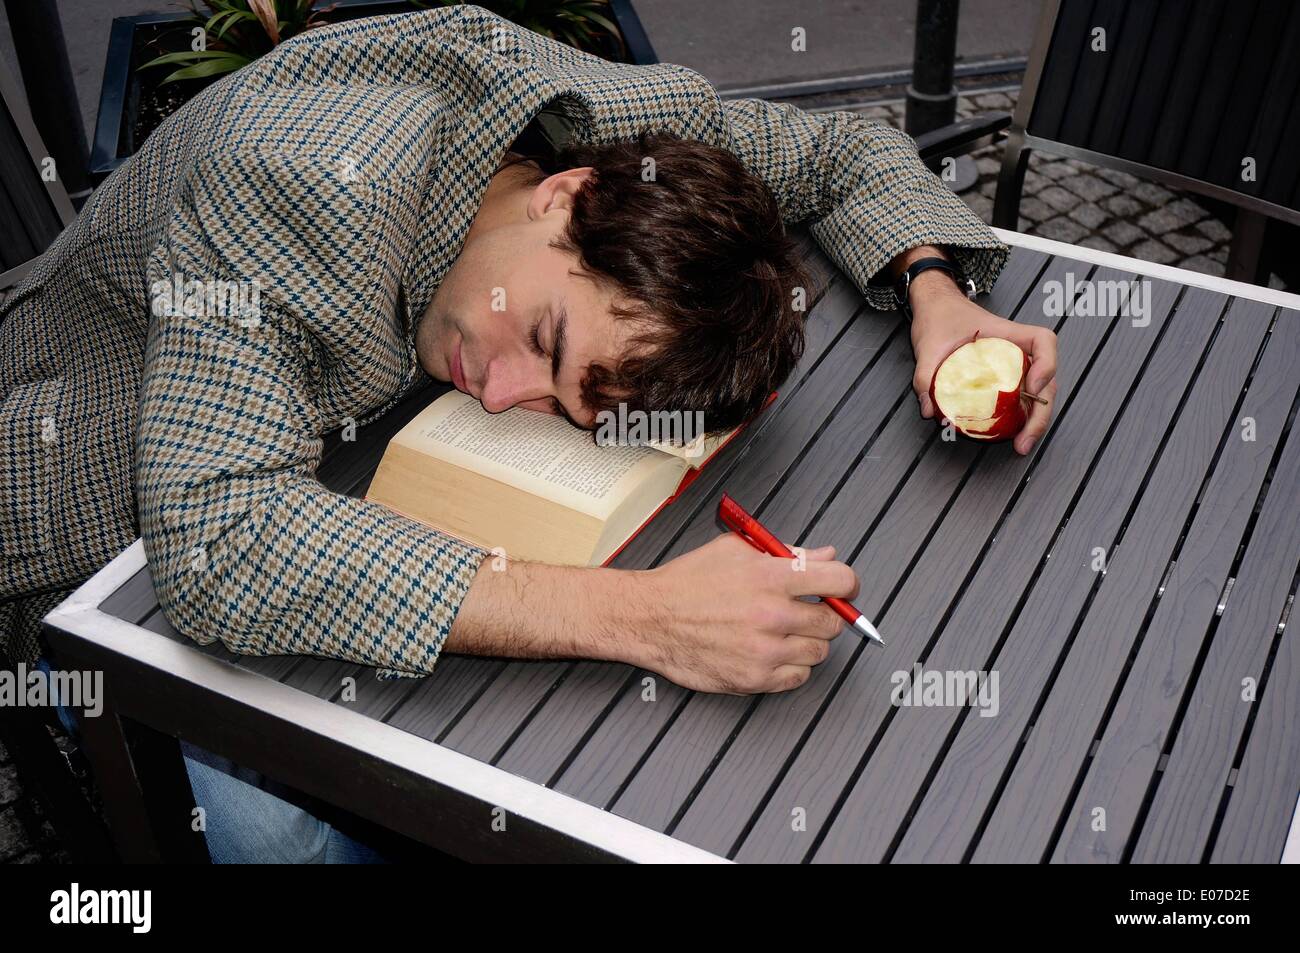 Berlin, Germany. 17th Sep, 2013. ILLUSTRATION - A man fell asleep at a table on a book with an apple and a pen in his hands in Berlin, Germany, 17 September 2013. Photo: Berliner Verlag/Steinach - ATTENTION! NO WIRE SERVICE -/dpa/Alamy Live News Stock Photo